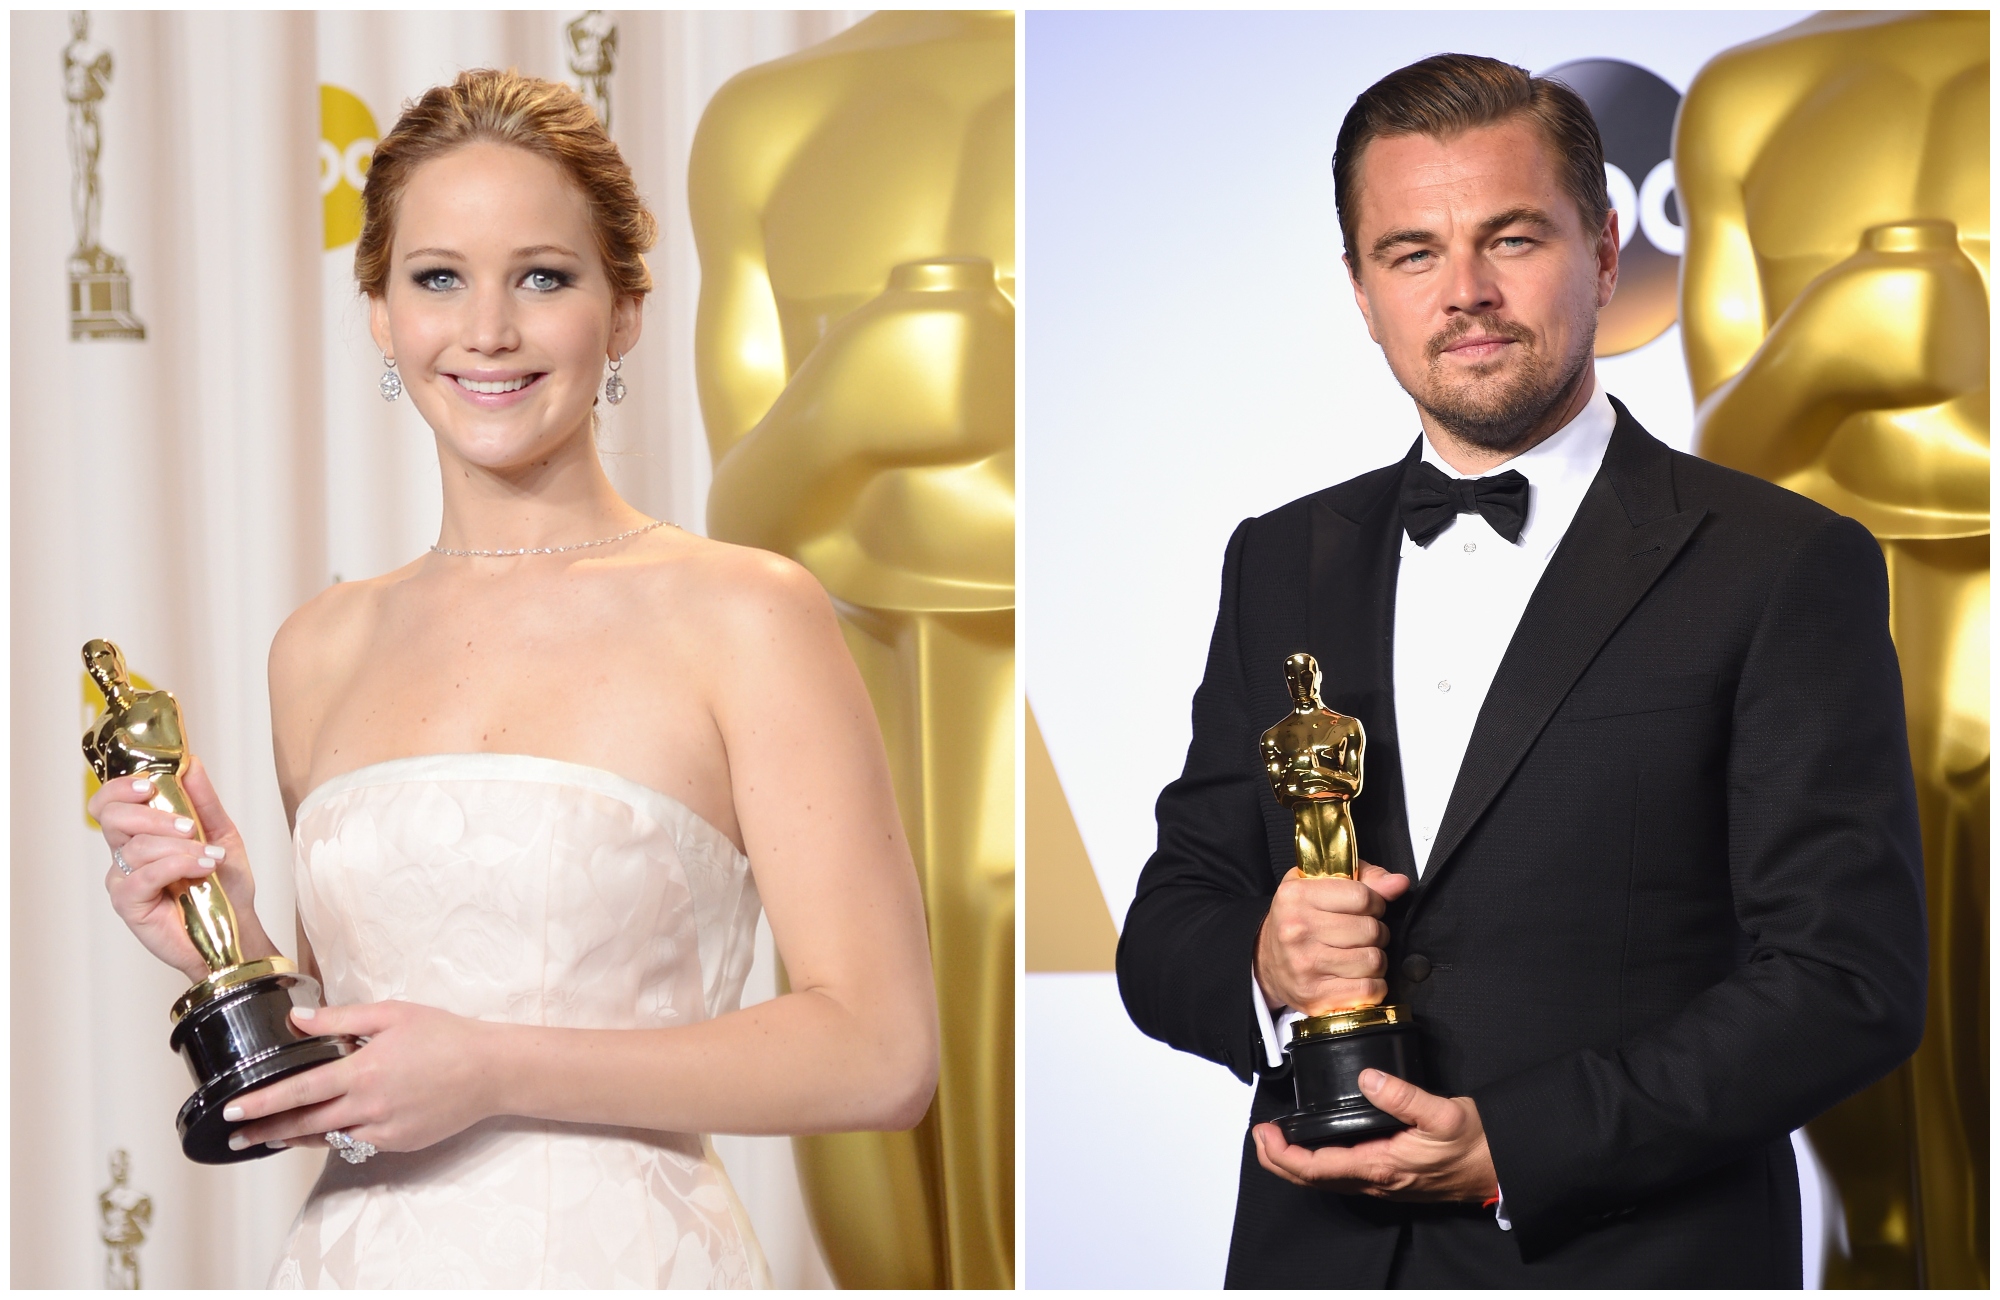 composite image of Jennifer Lawrence and Leonardo DiCaprio with their Oscars